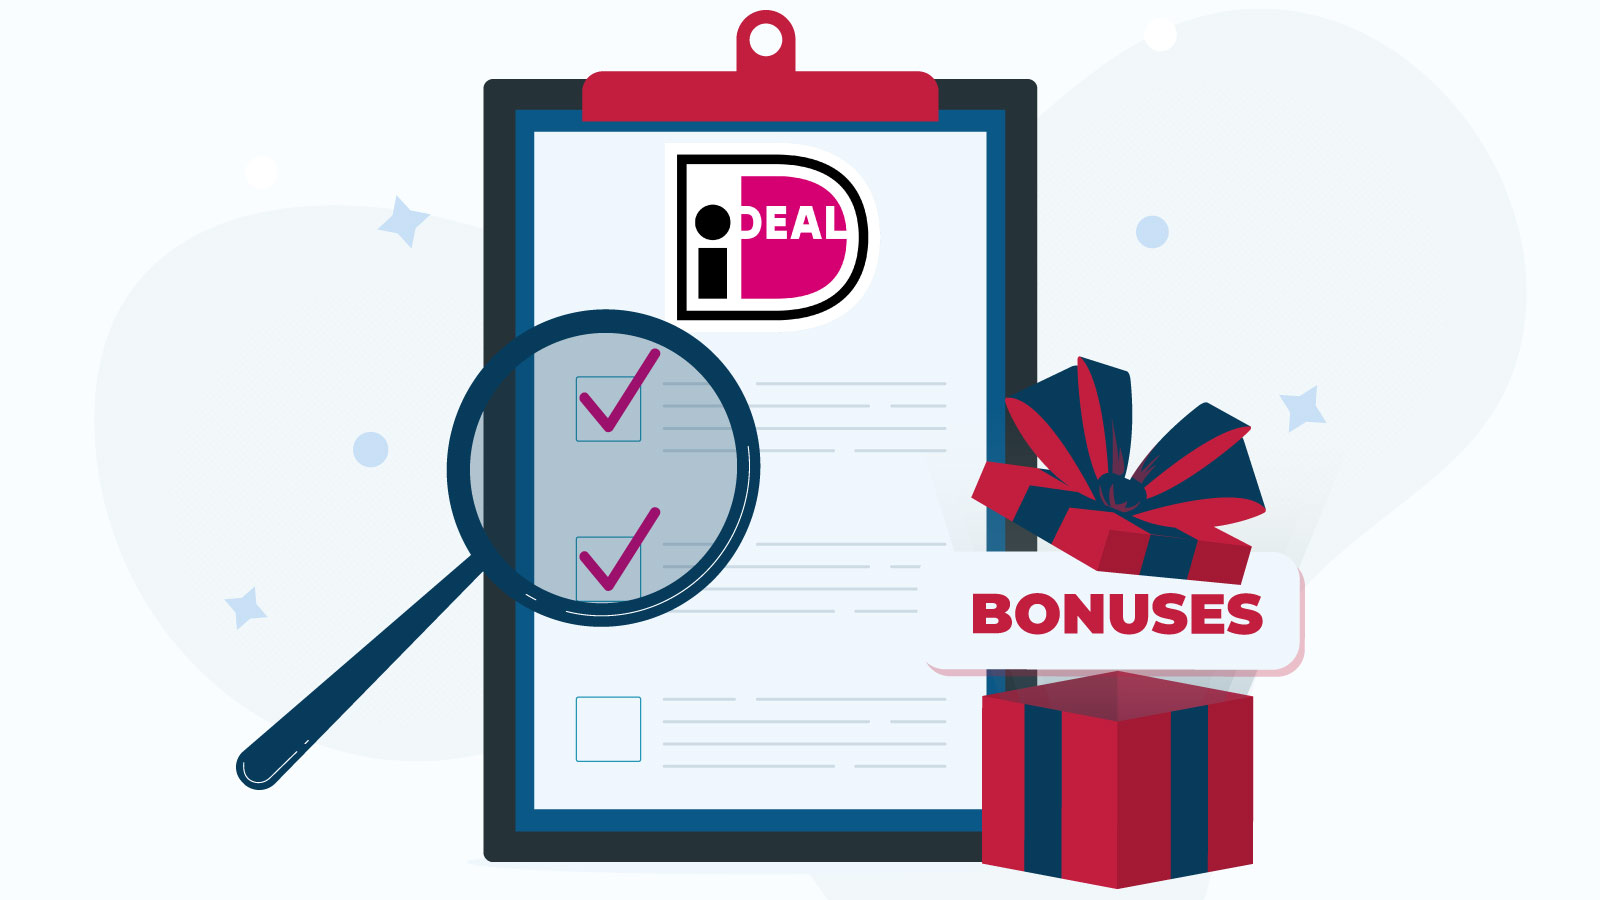 What to check before claiming bonuses with iDeal